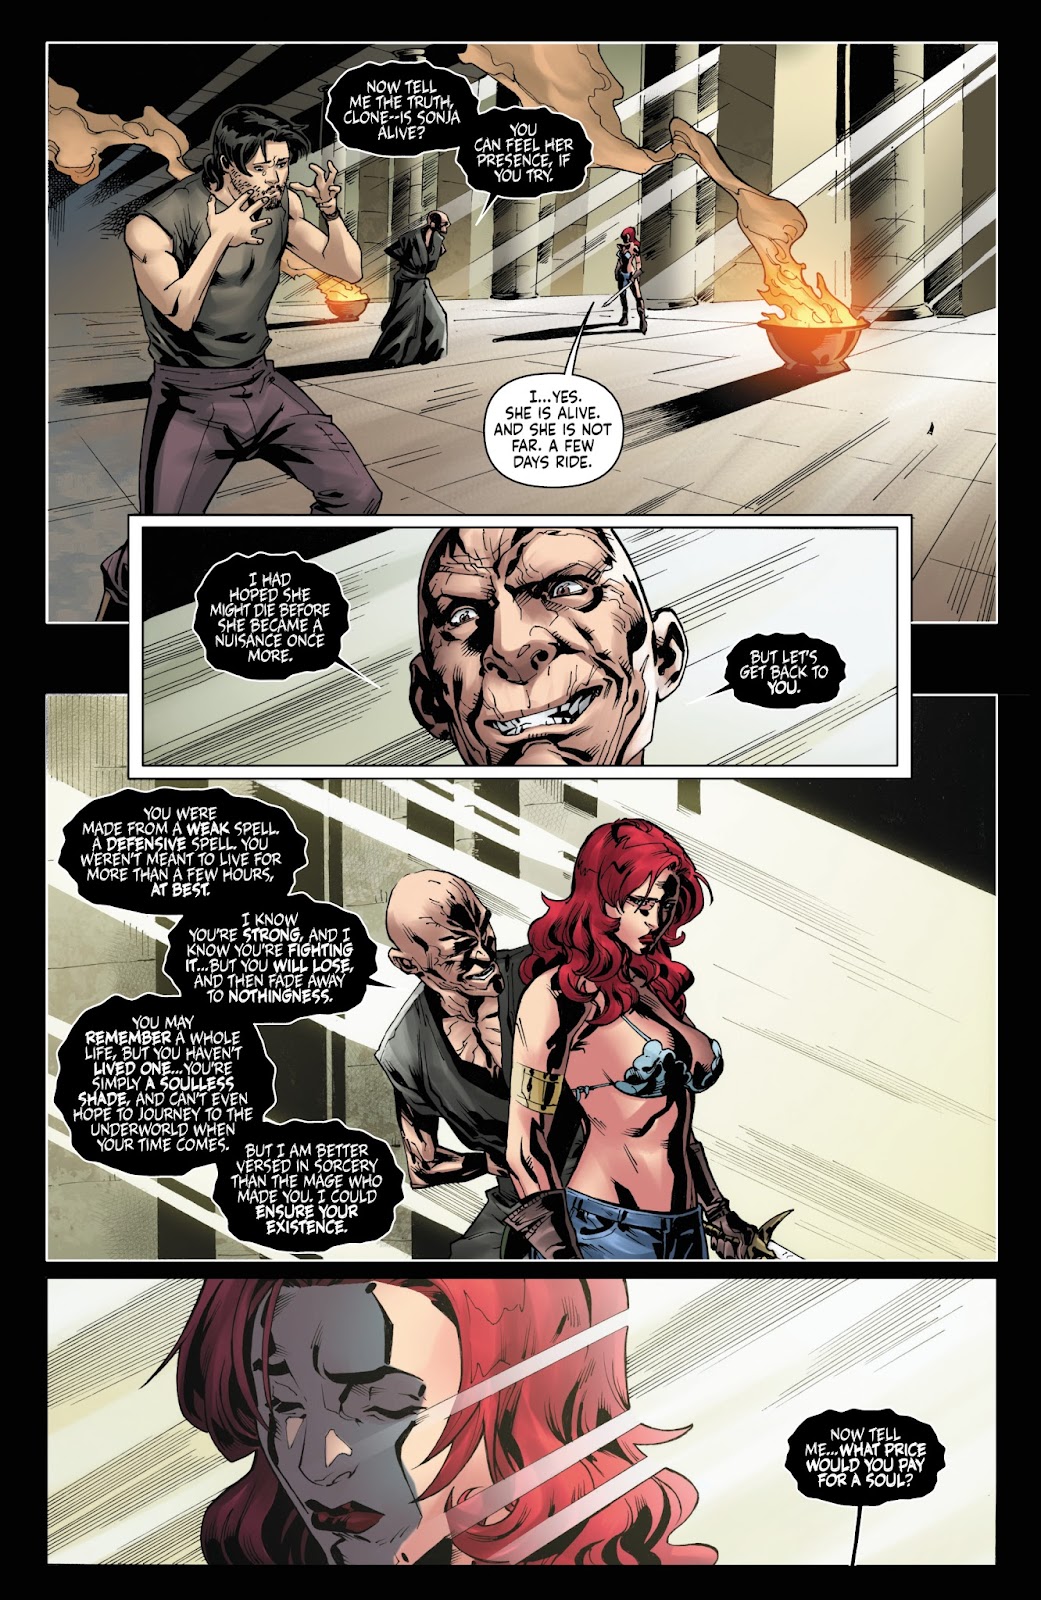 Red Sonja Vol. 4 issue 15 - Page 9